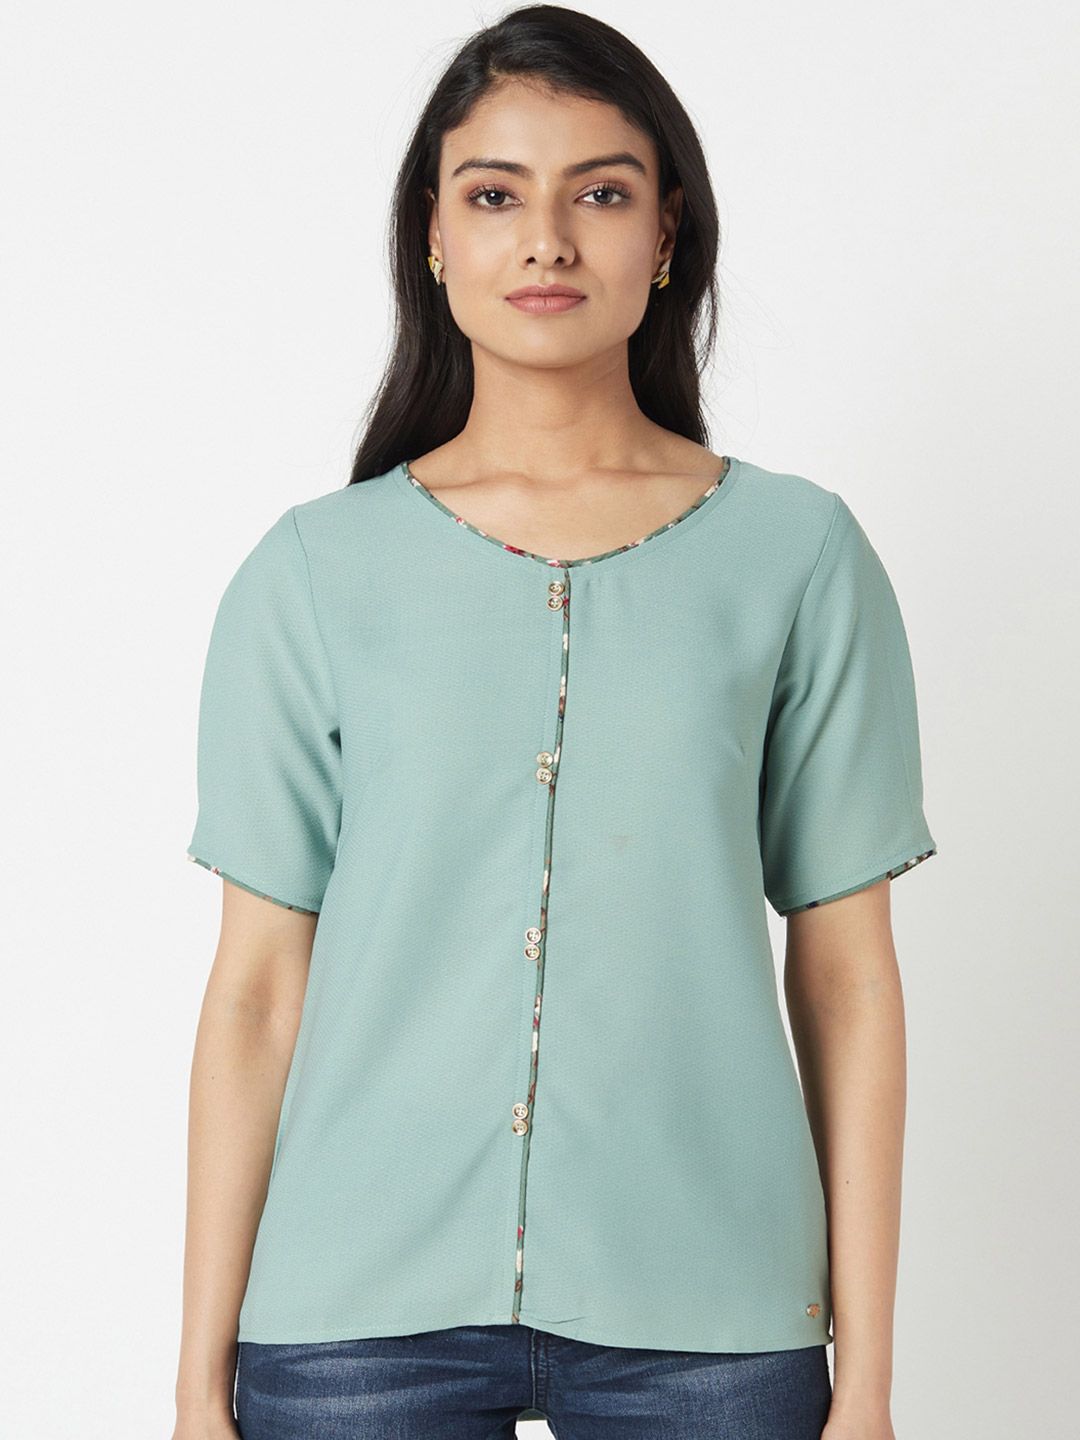 Miss Grace Round Neck Shirt Sleeves Regular Top Price in India